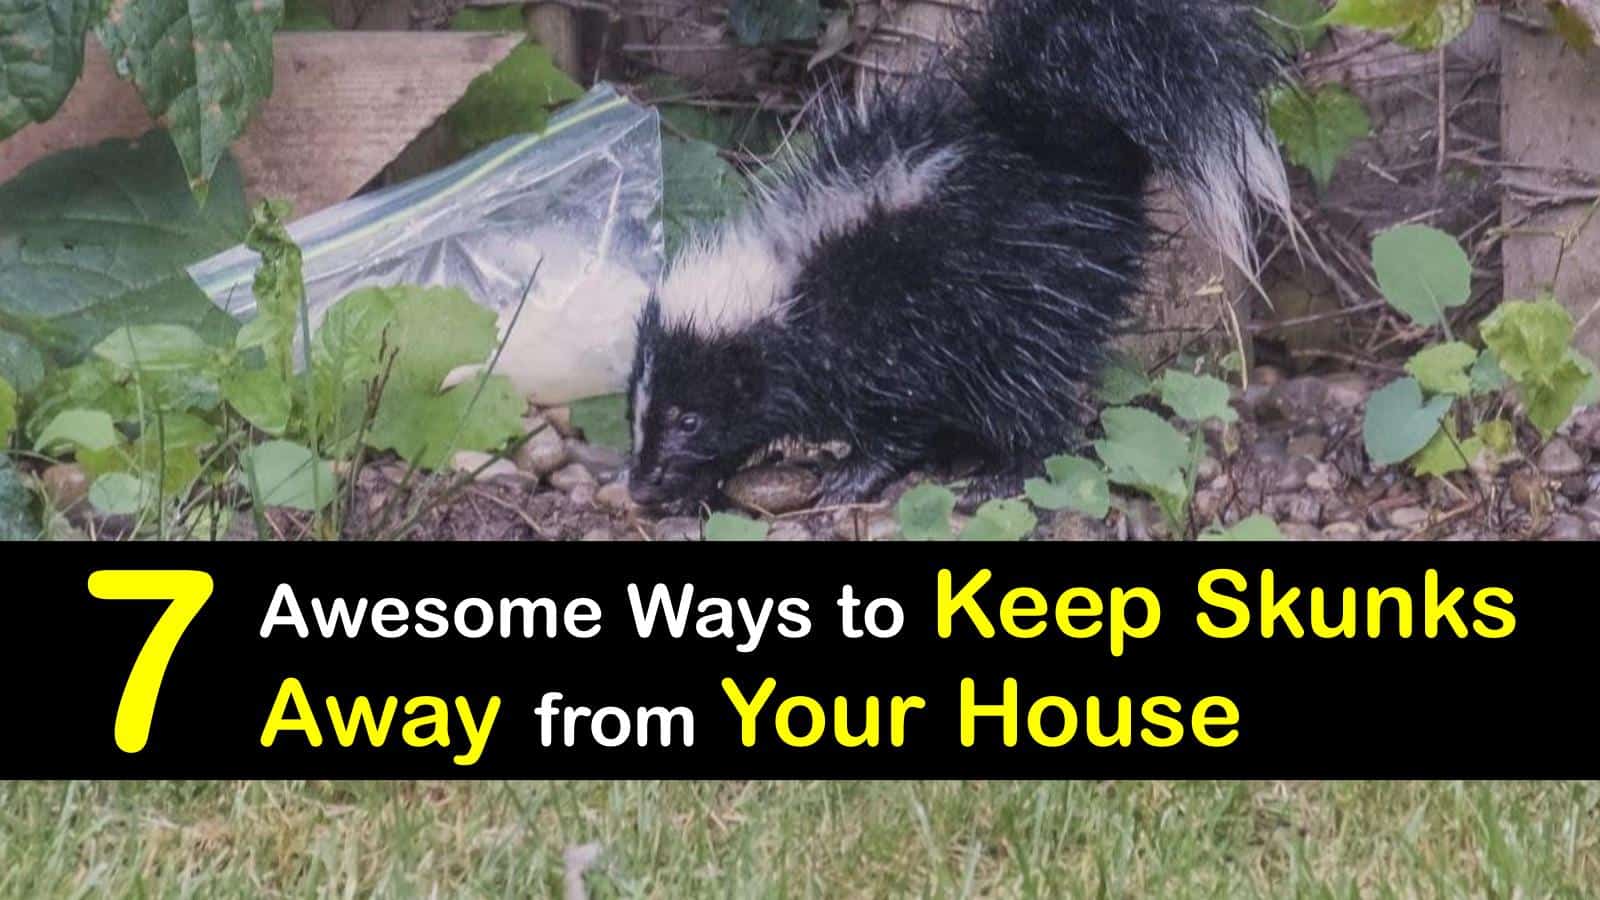 7 Awesome Ways to Keep Skunks Away from Your House